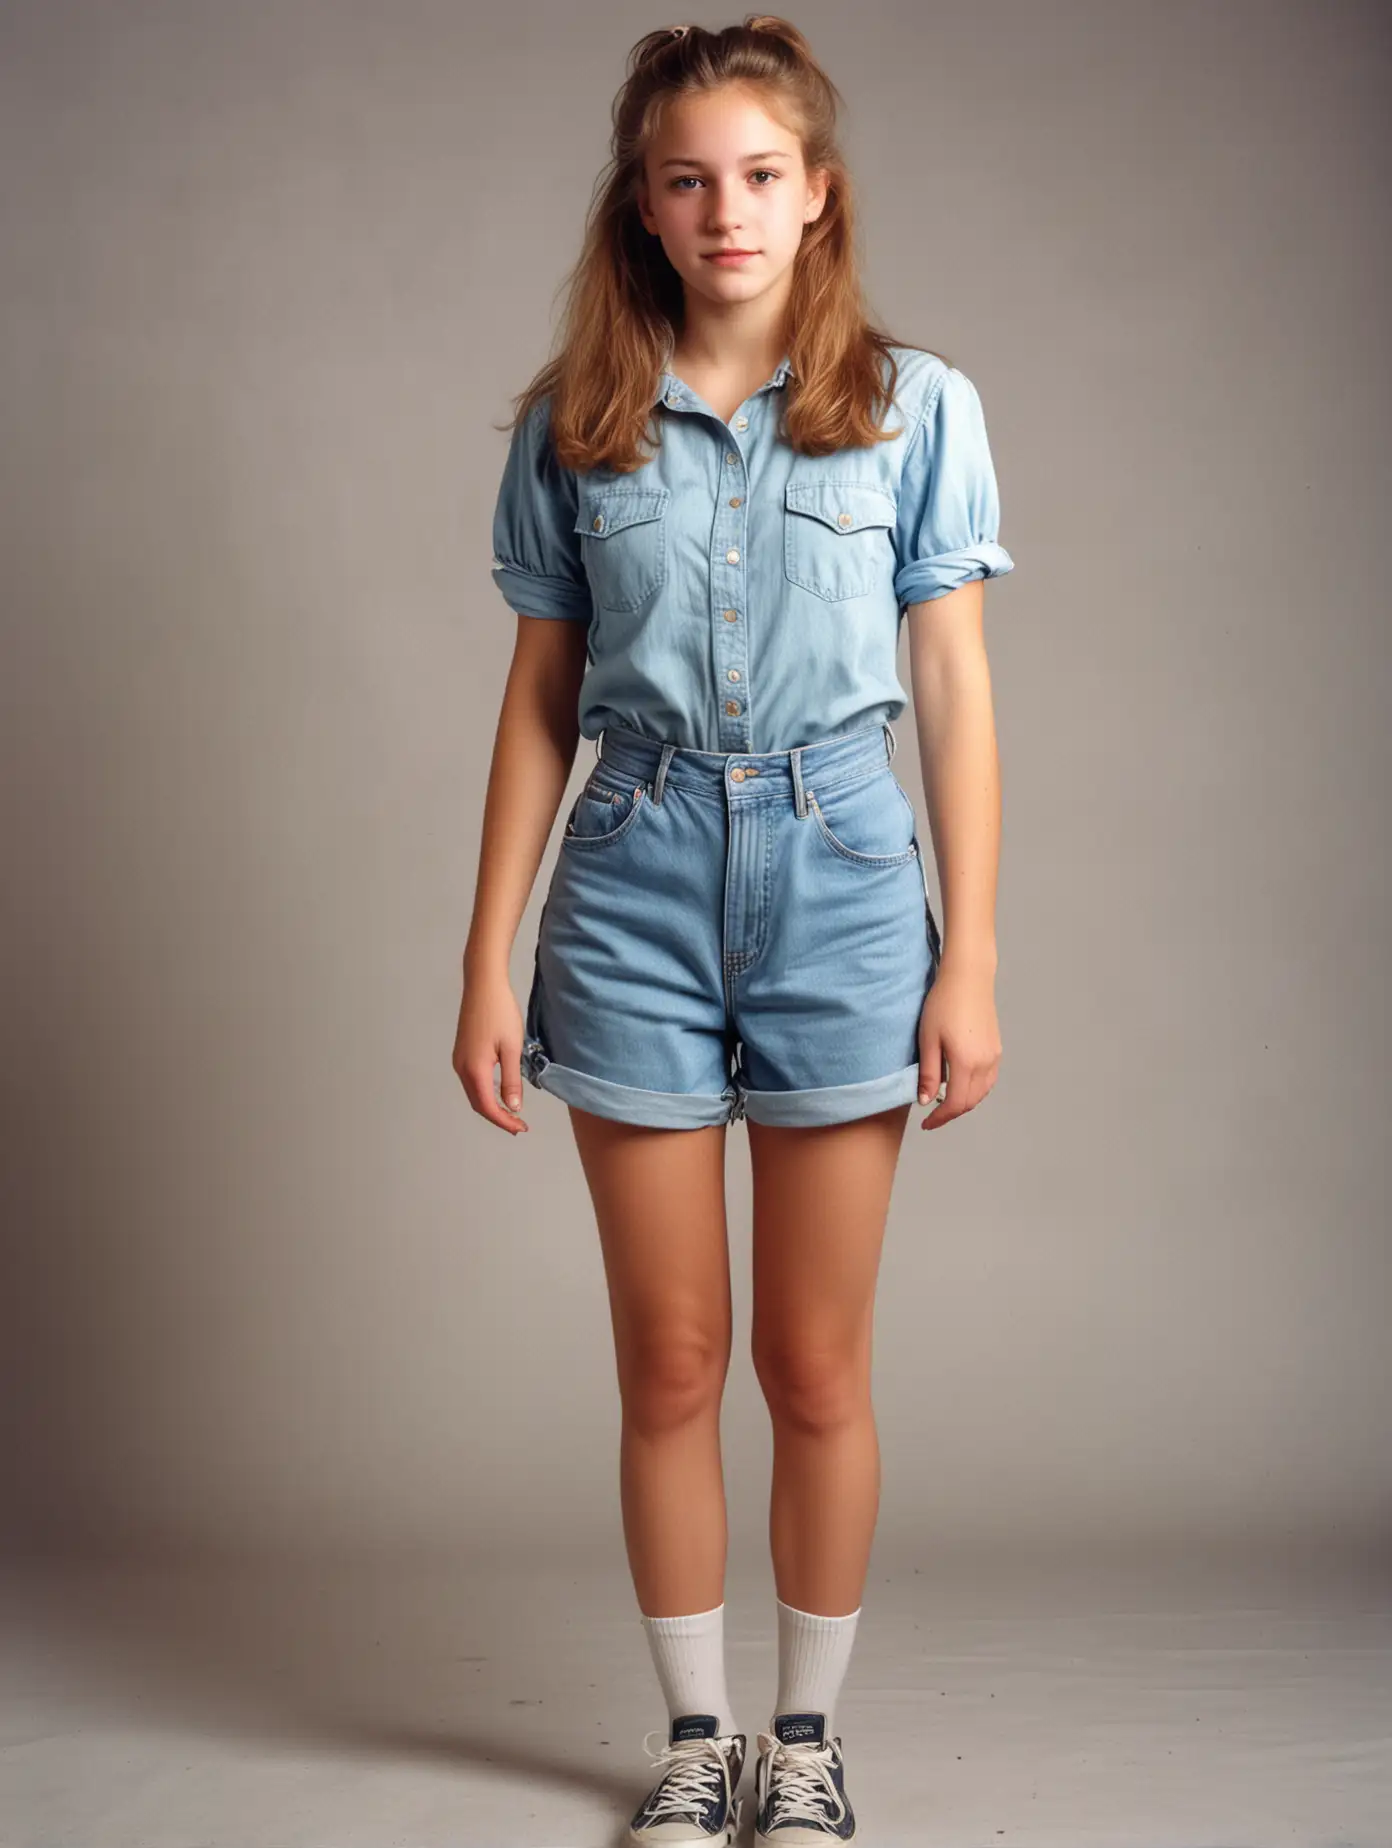 A girl, an old photo from the 80s and 90s in the United States, facing the camera, 18 years old, full body photo, 